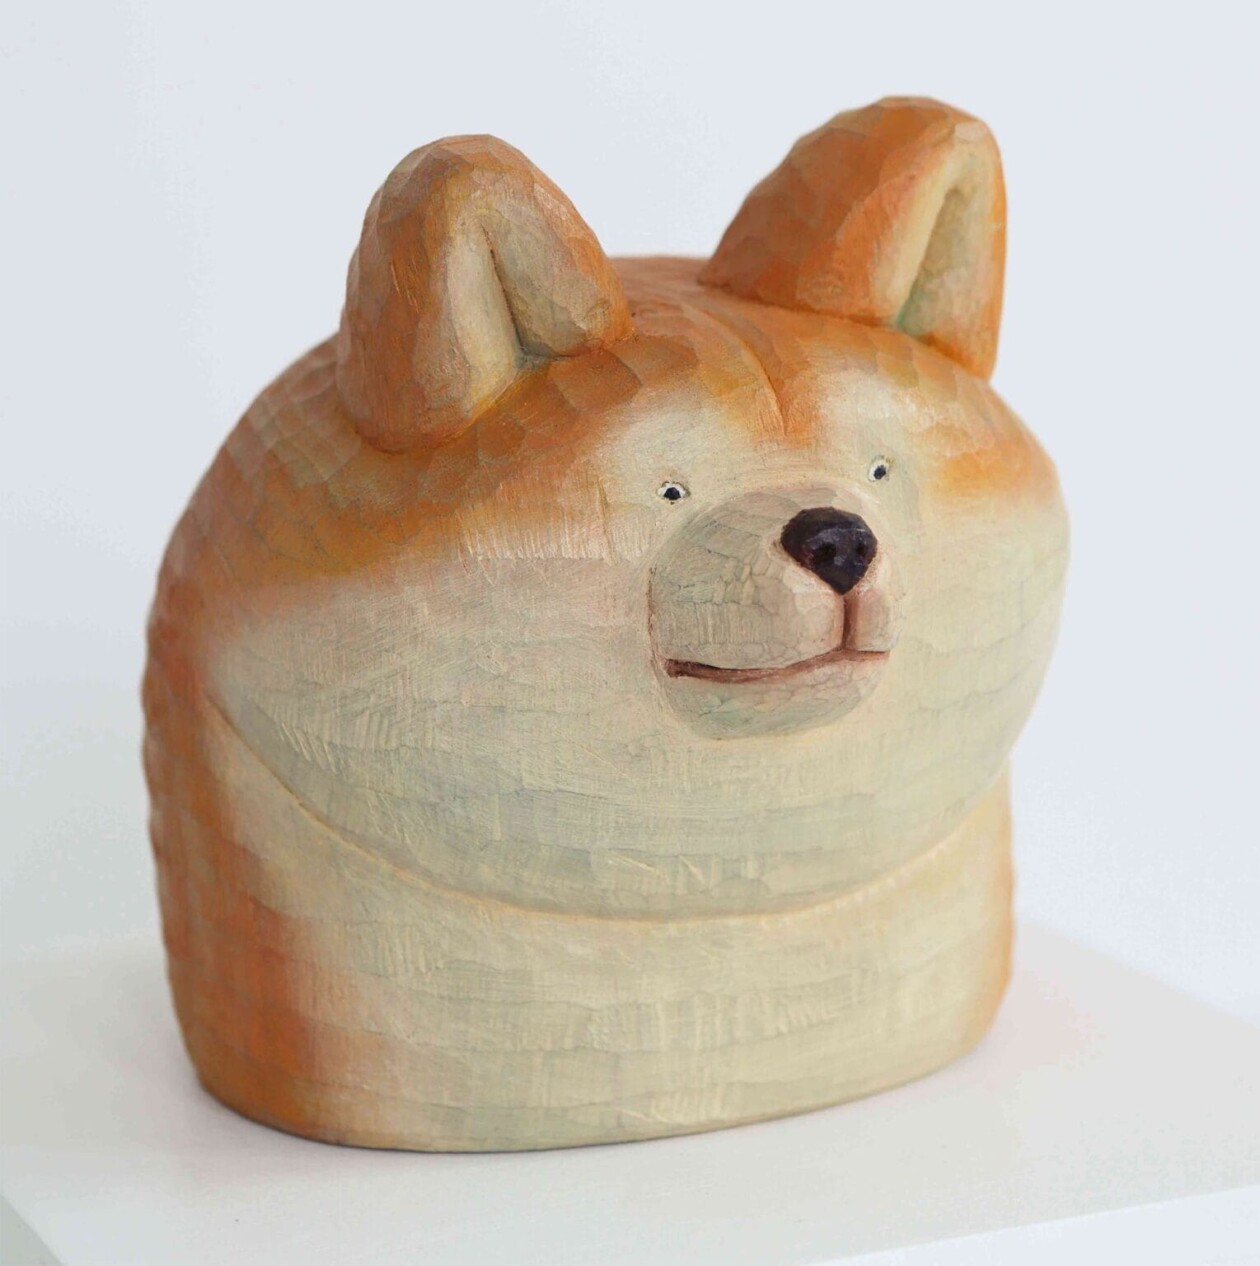 Misato Sano's Wooden Sculptures Bring Canine Companions To Life (20)